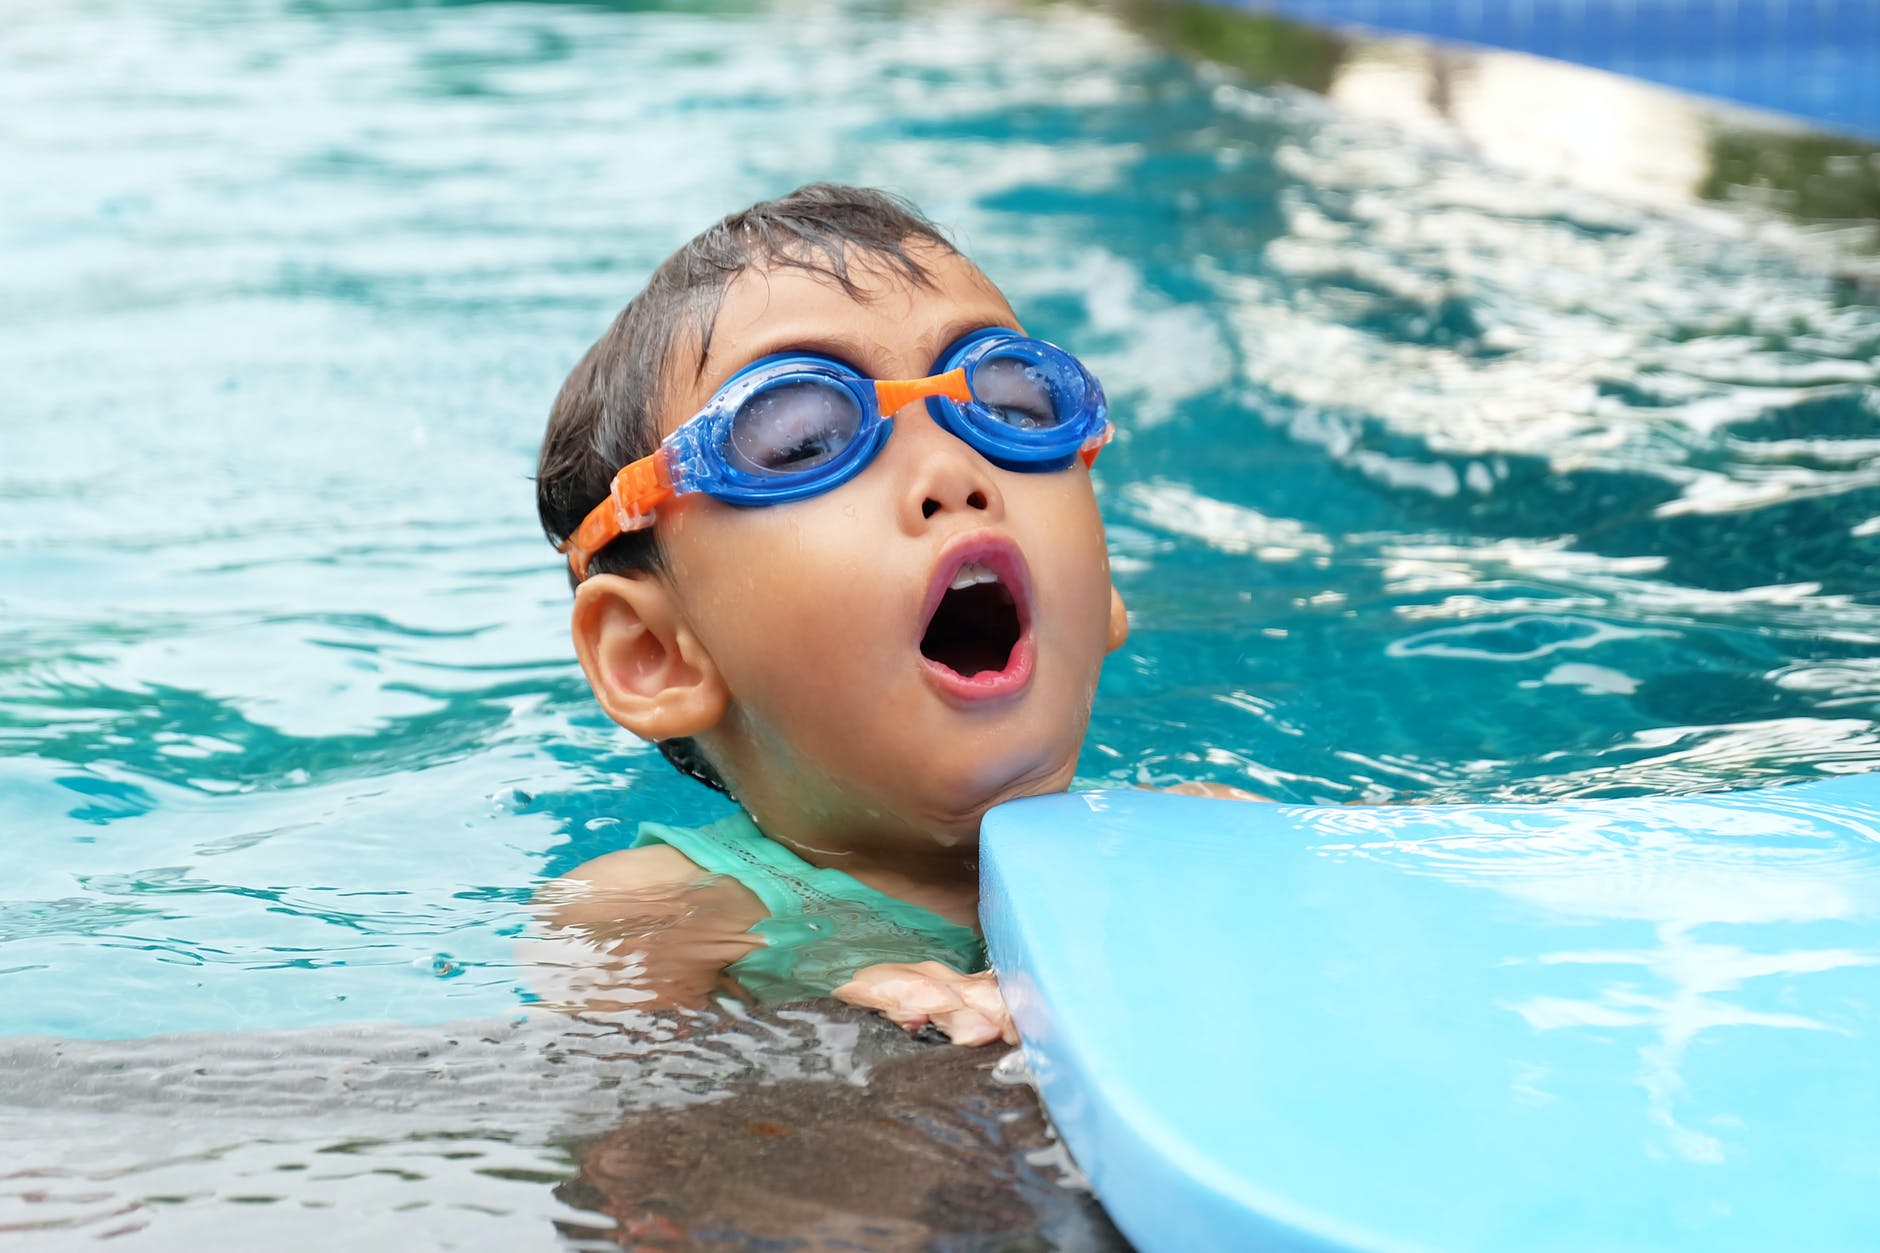 A kid with goggles on learning to swim in the pool